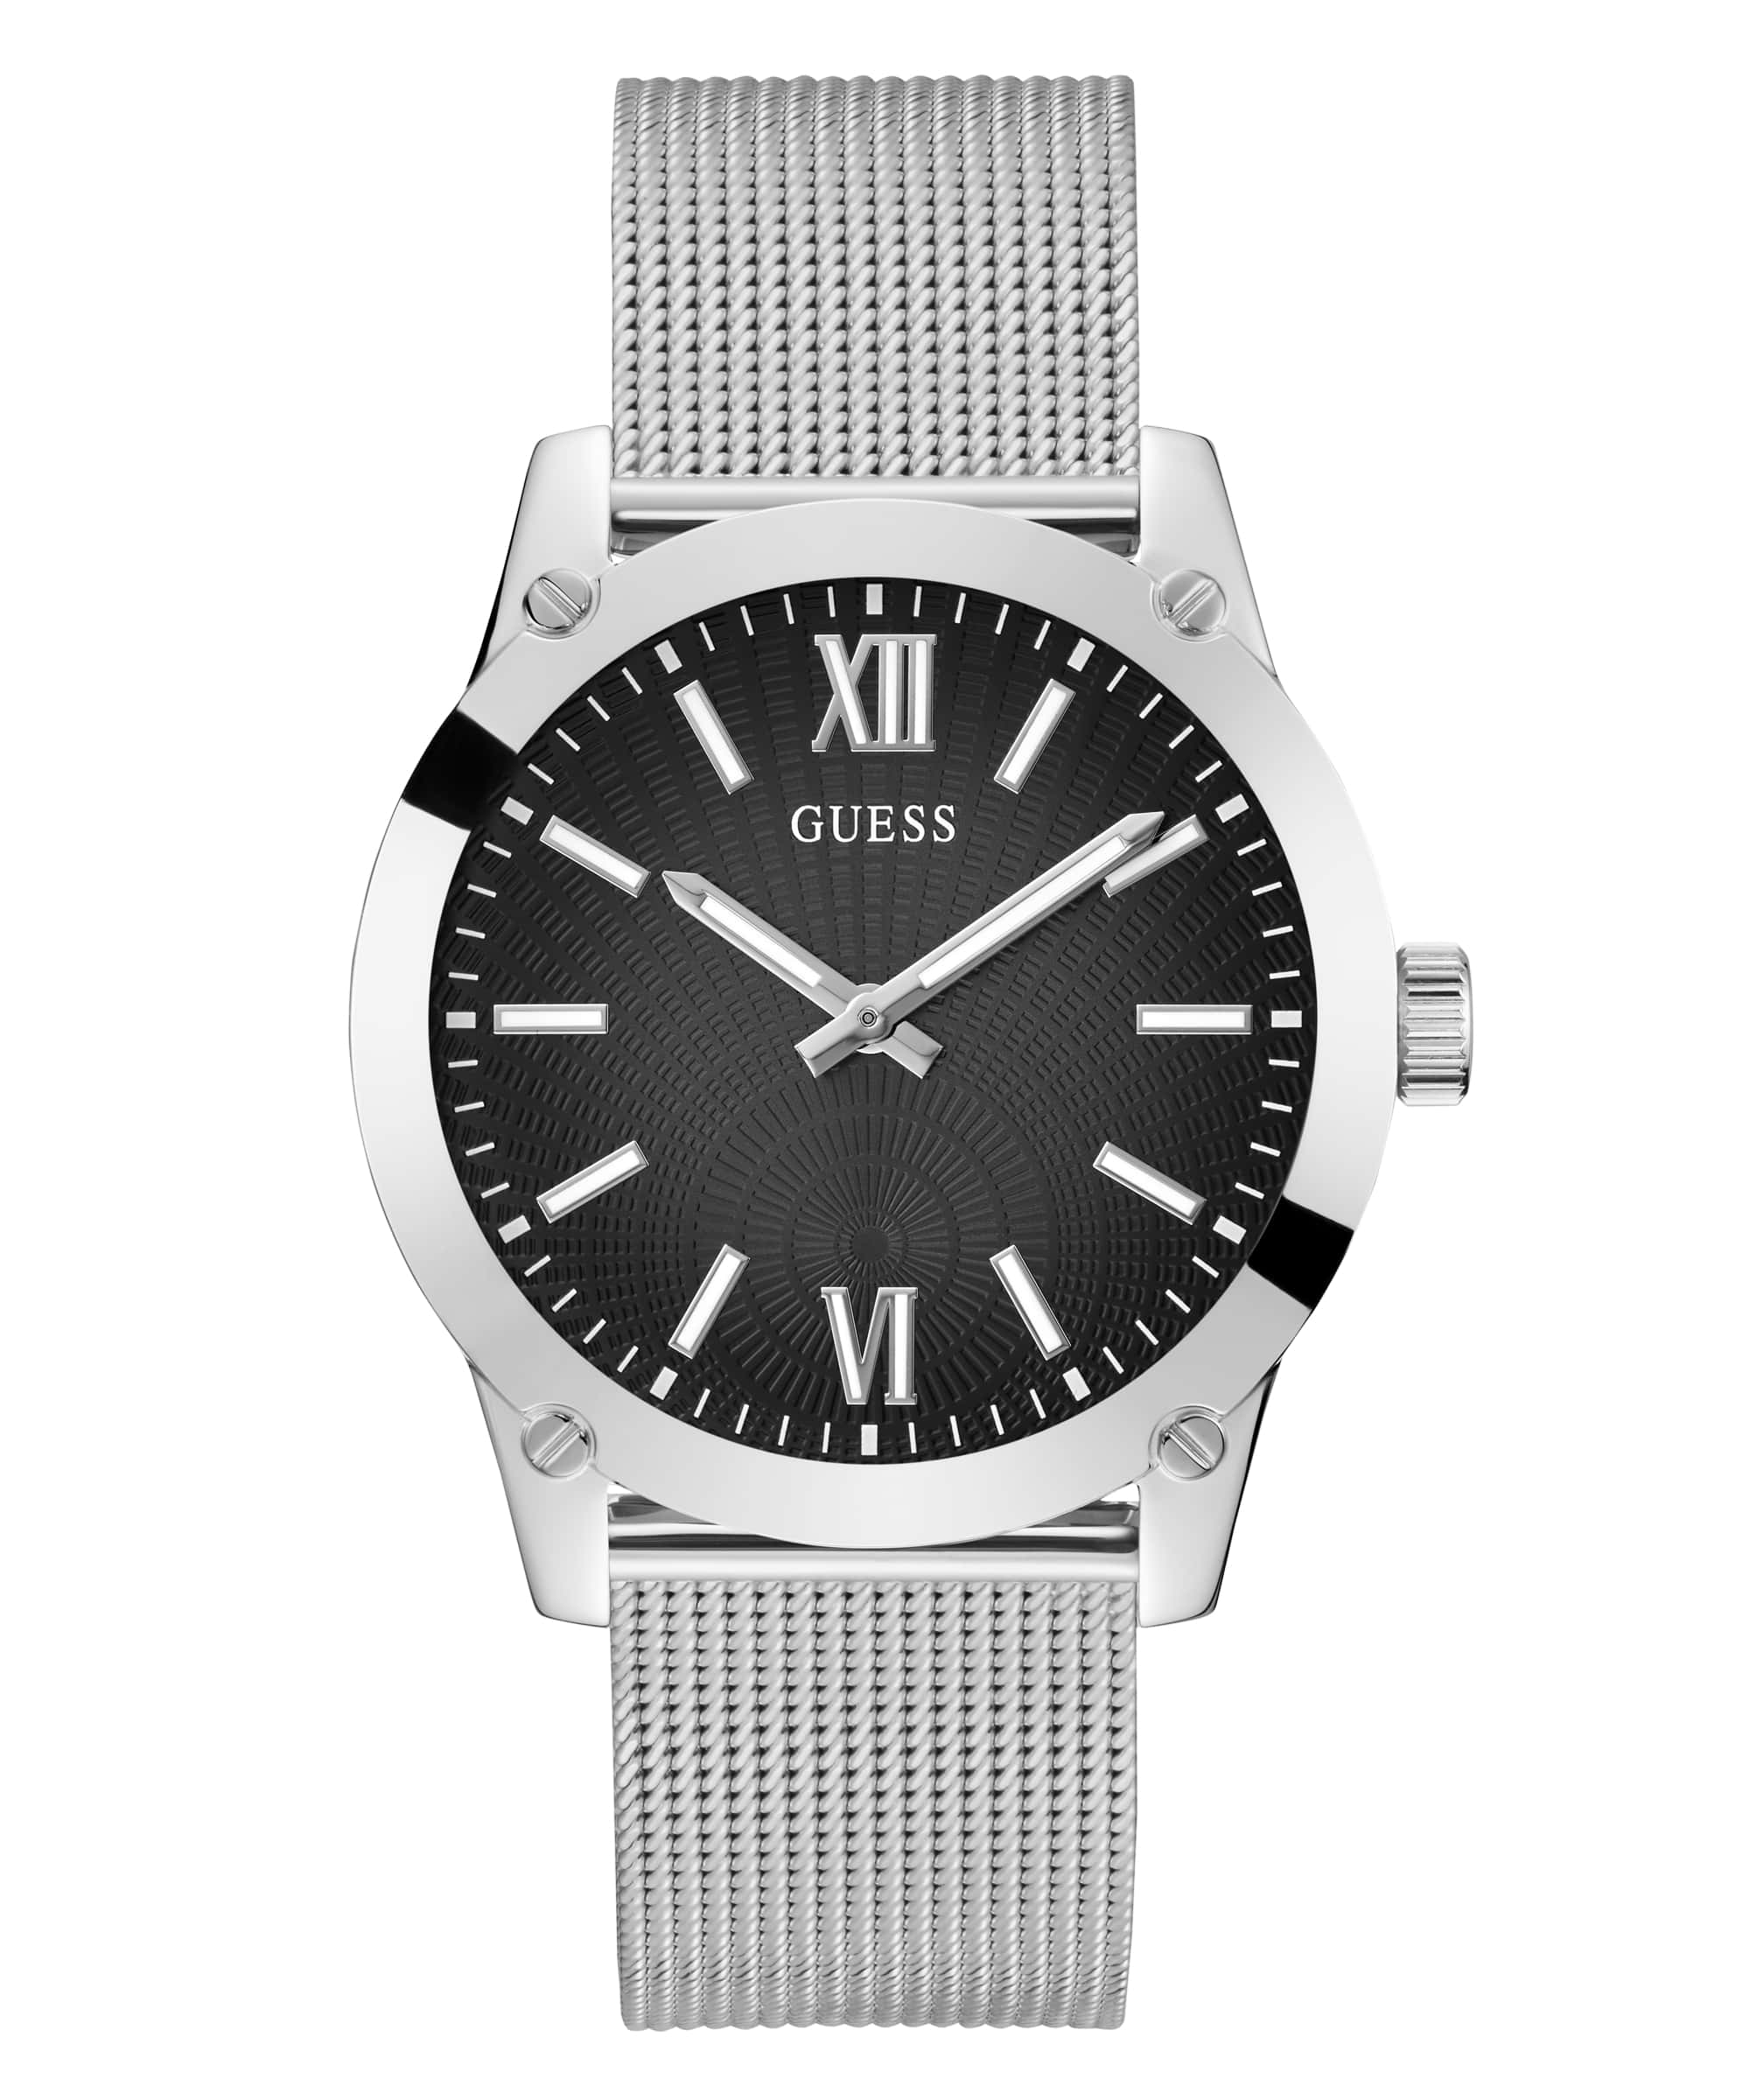 Guess TAILOR Silver Dial Men's Watch - GW0389G1 – Just Watches